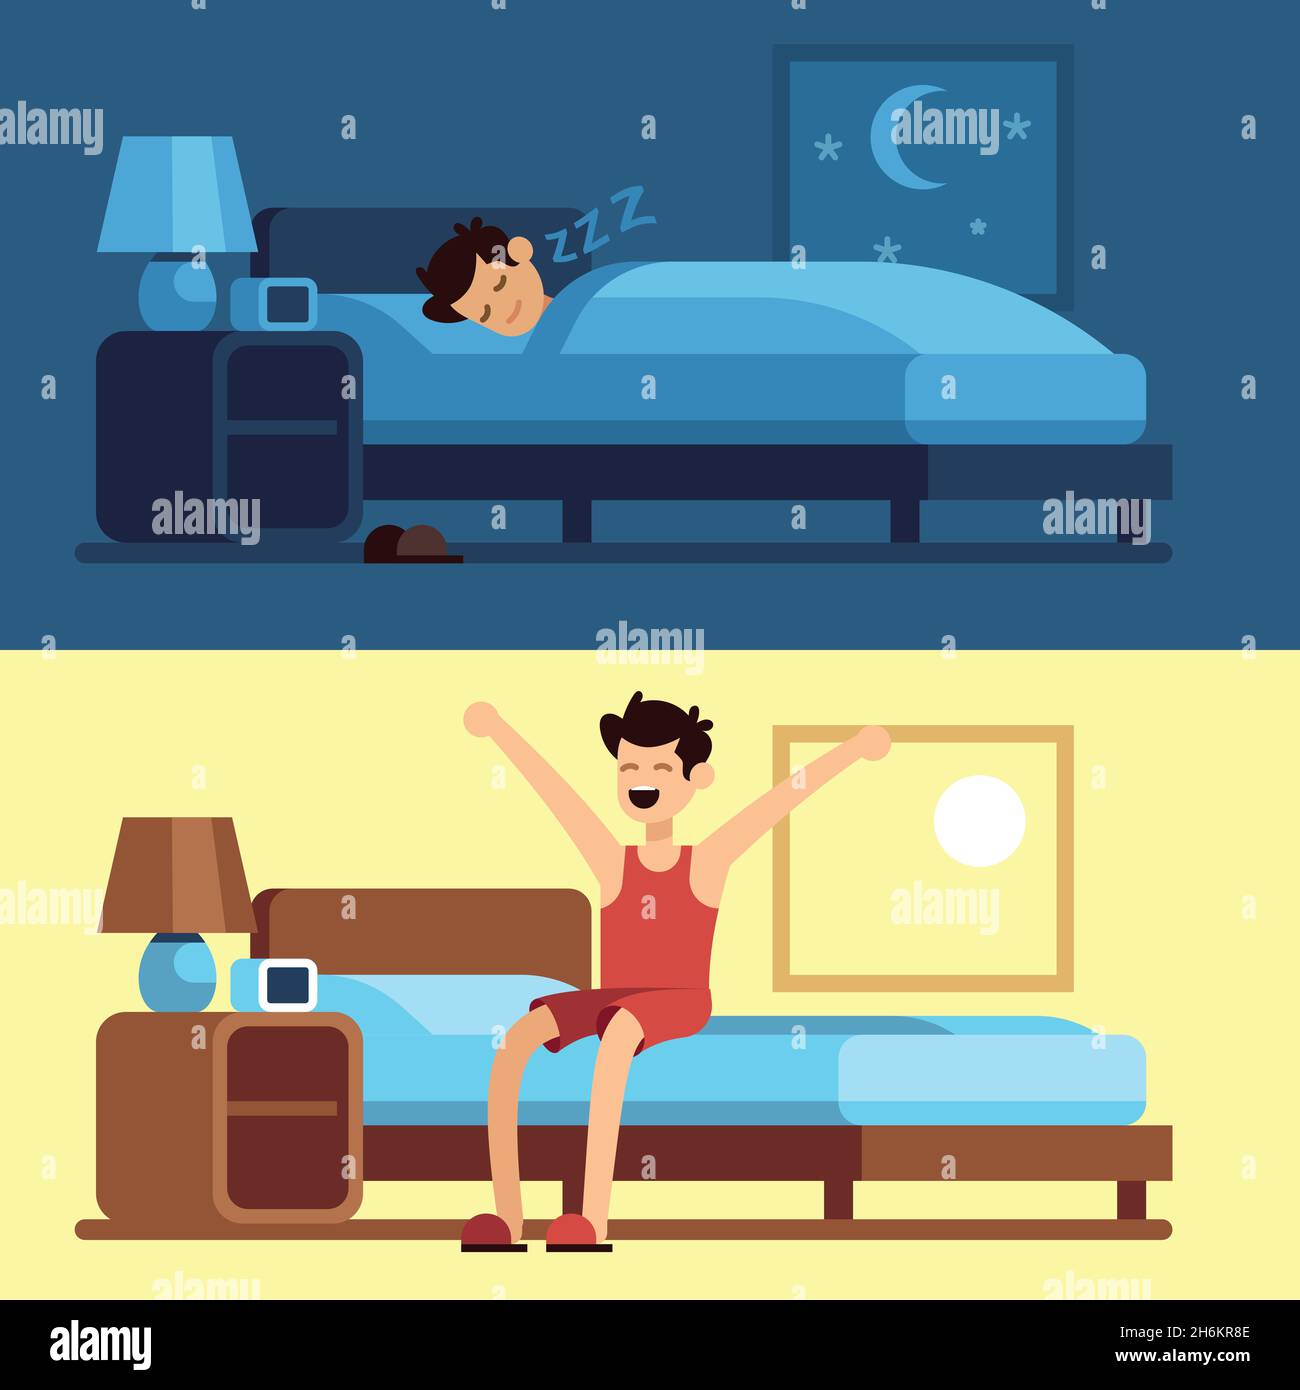 Man sleeping waking up. Person under duvet at night and getting out of bed morning. Peacefully sleep in comfy mattress Stock Vector